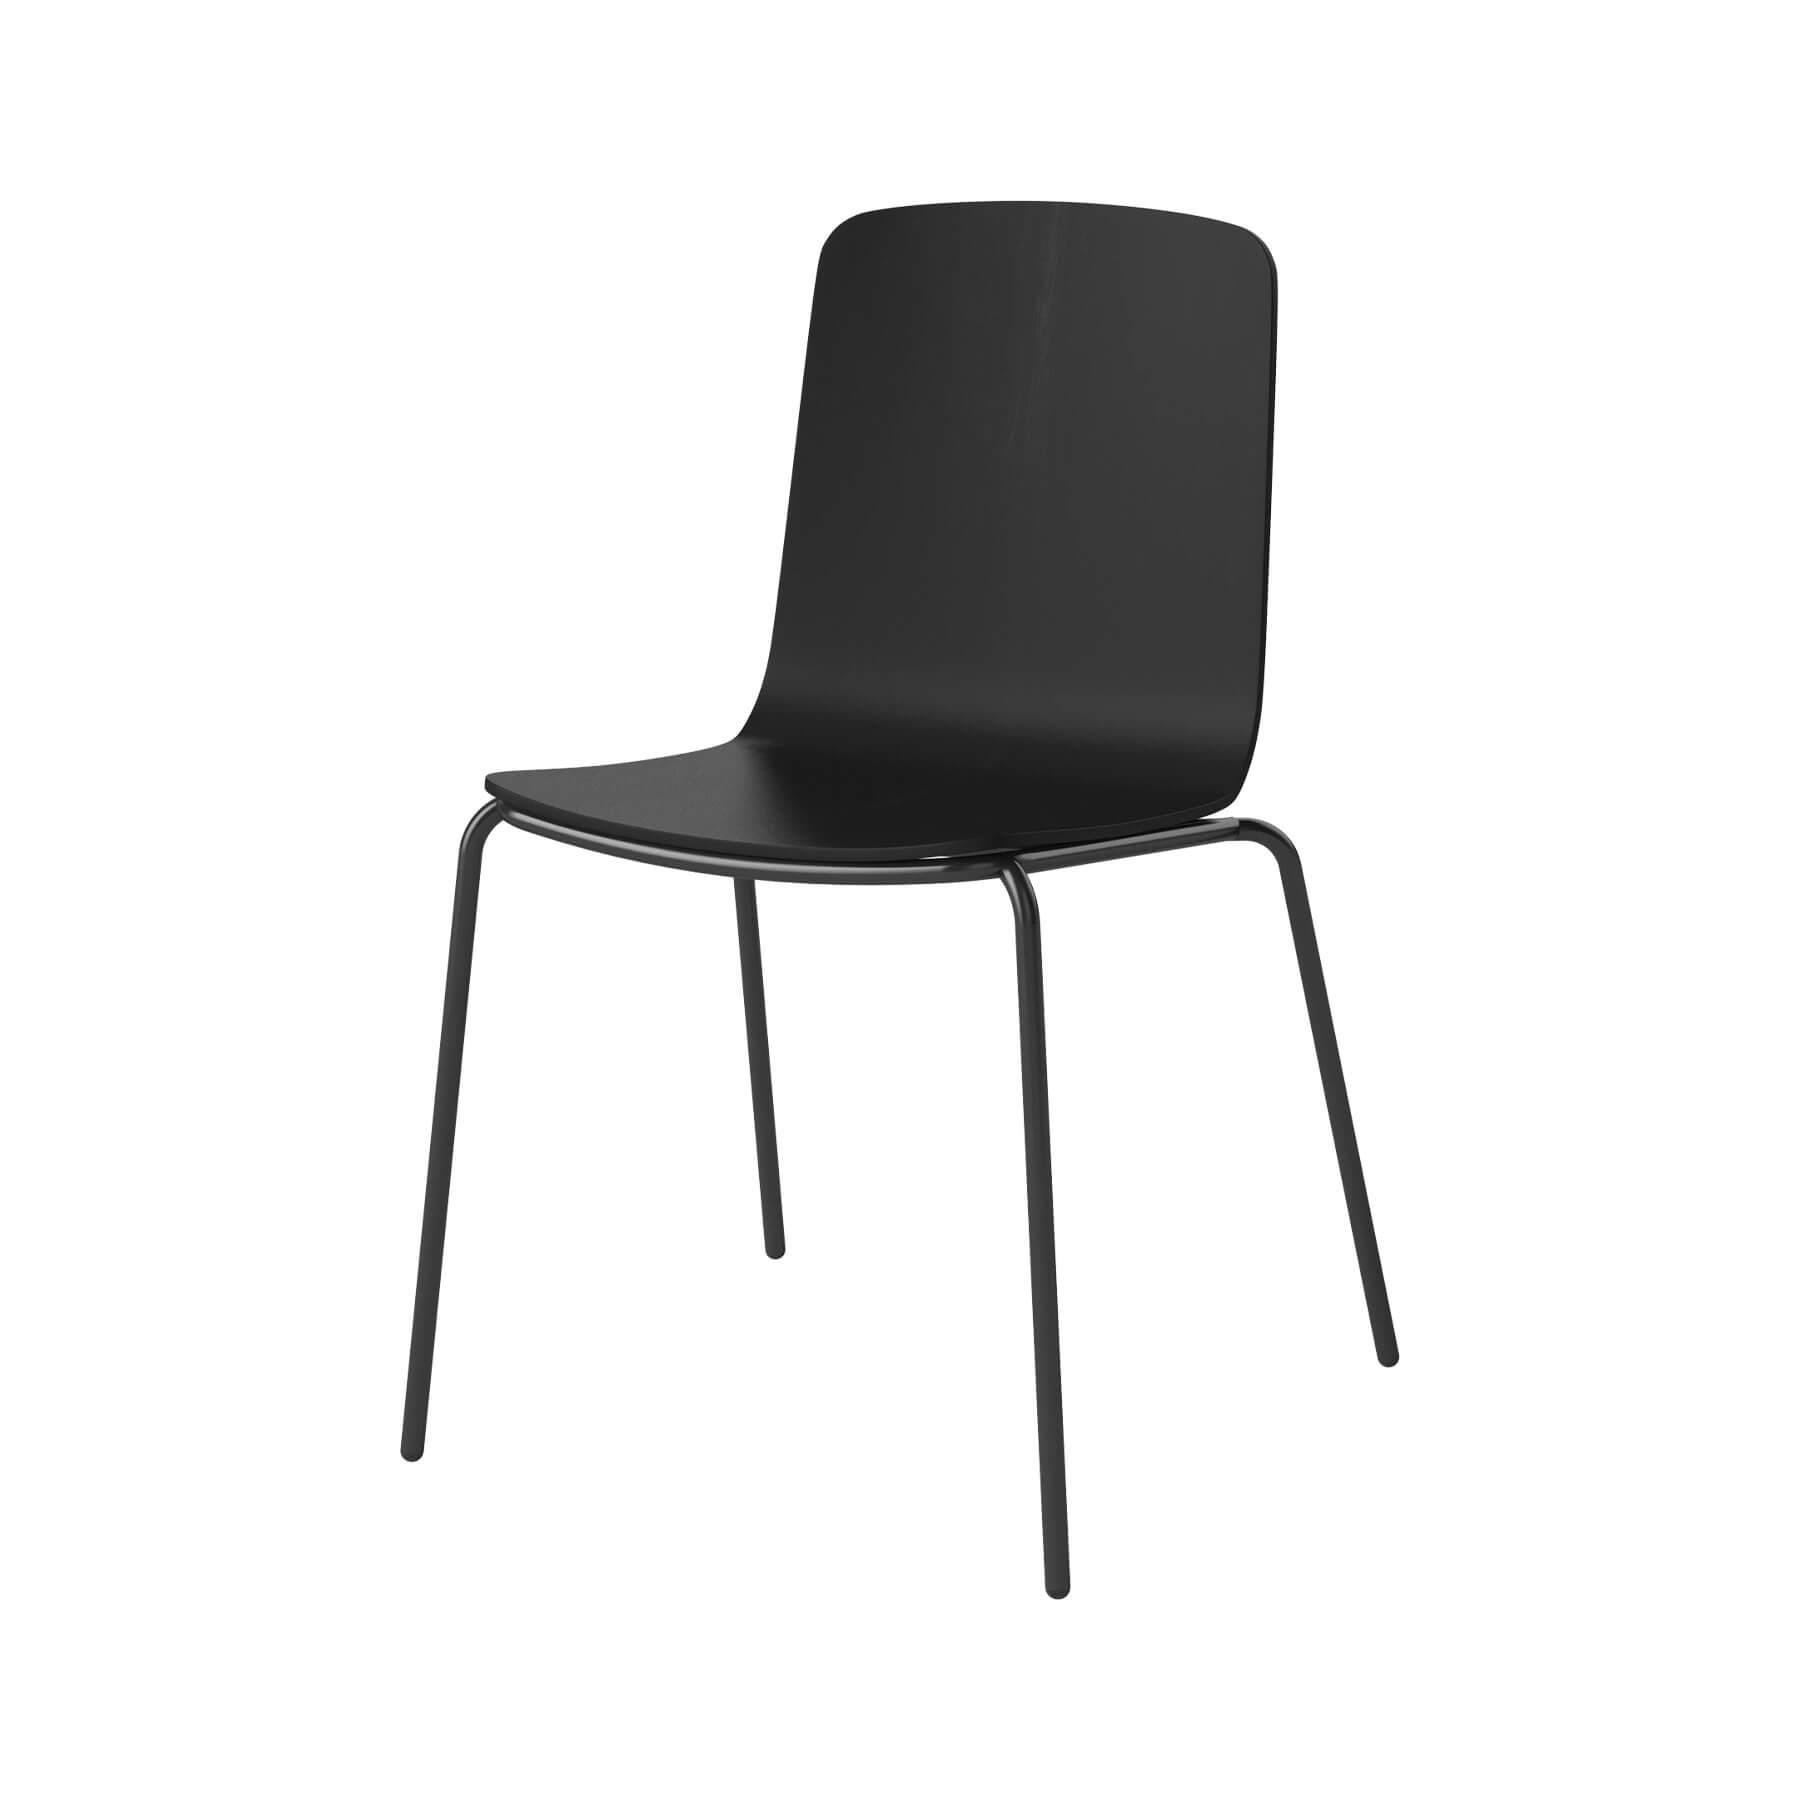 Bolia Palm Dining Chair Metal Legs Black Laquered Oak Black Laquered Legs Designer Furniture From Holloways Of Ludlow